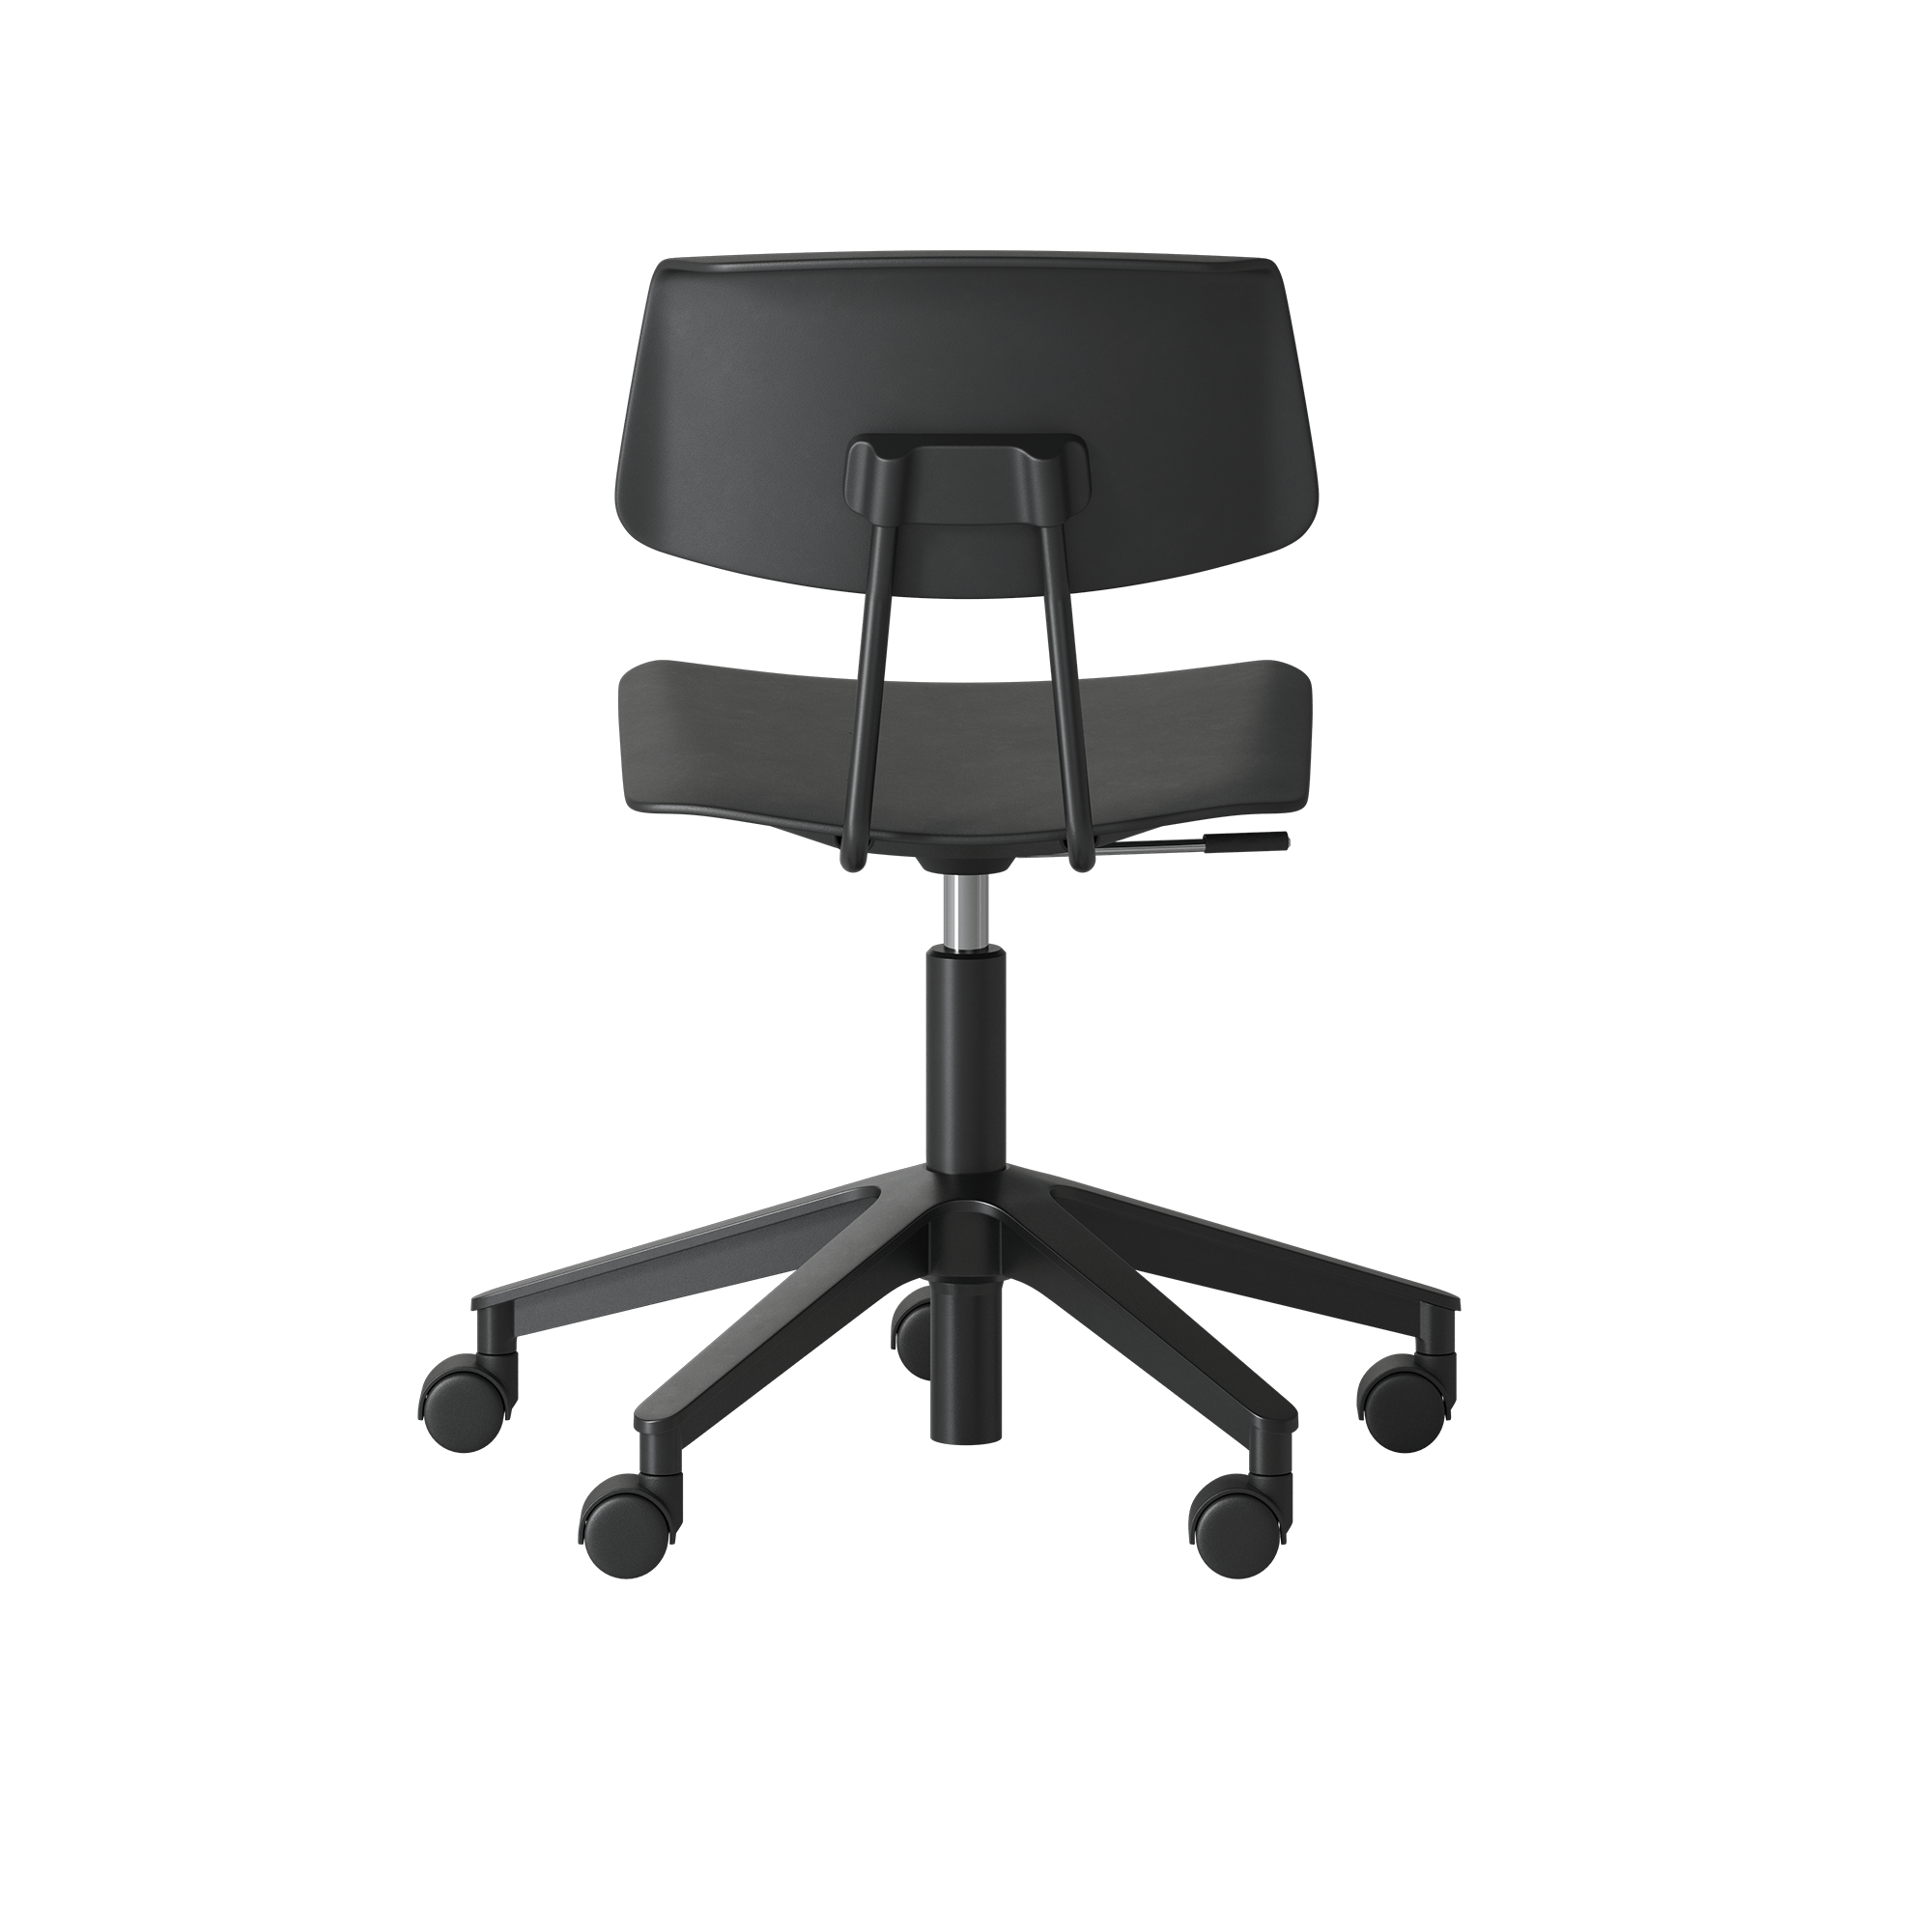 A Share Move 60 office desk chair